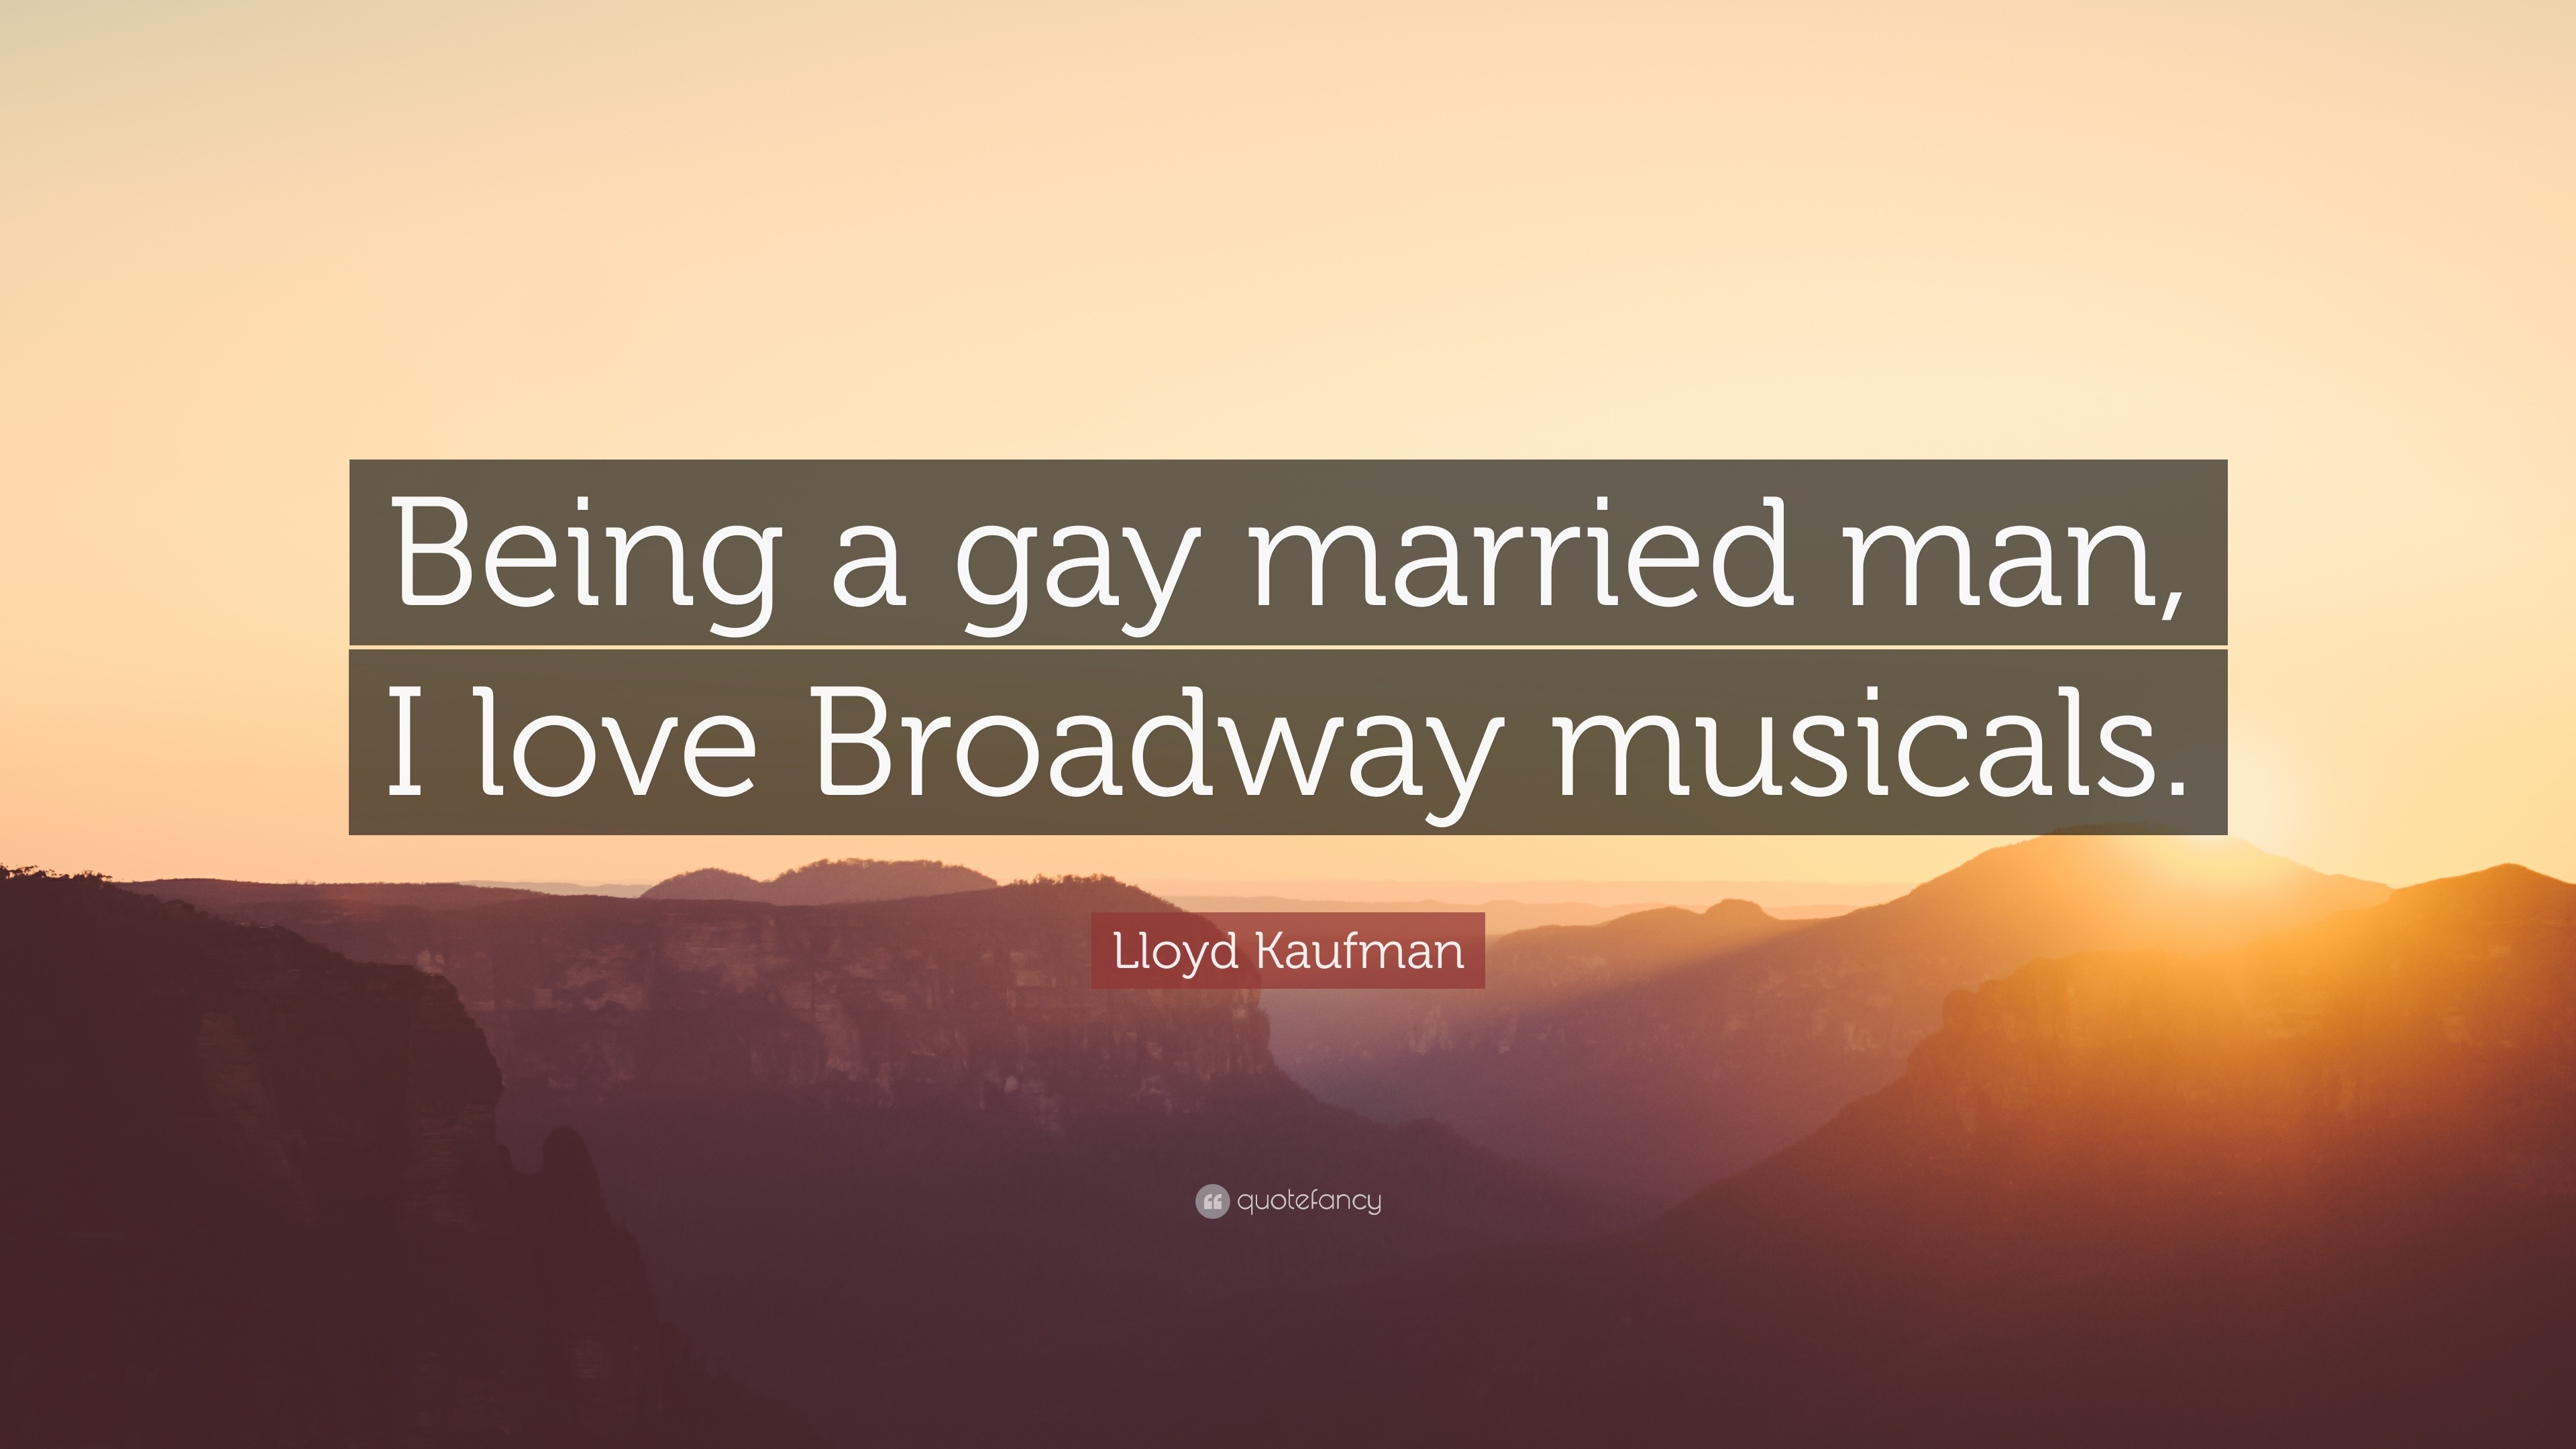 Lloyd Kaufman Quote “Being a married man I love Broadway musicals